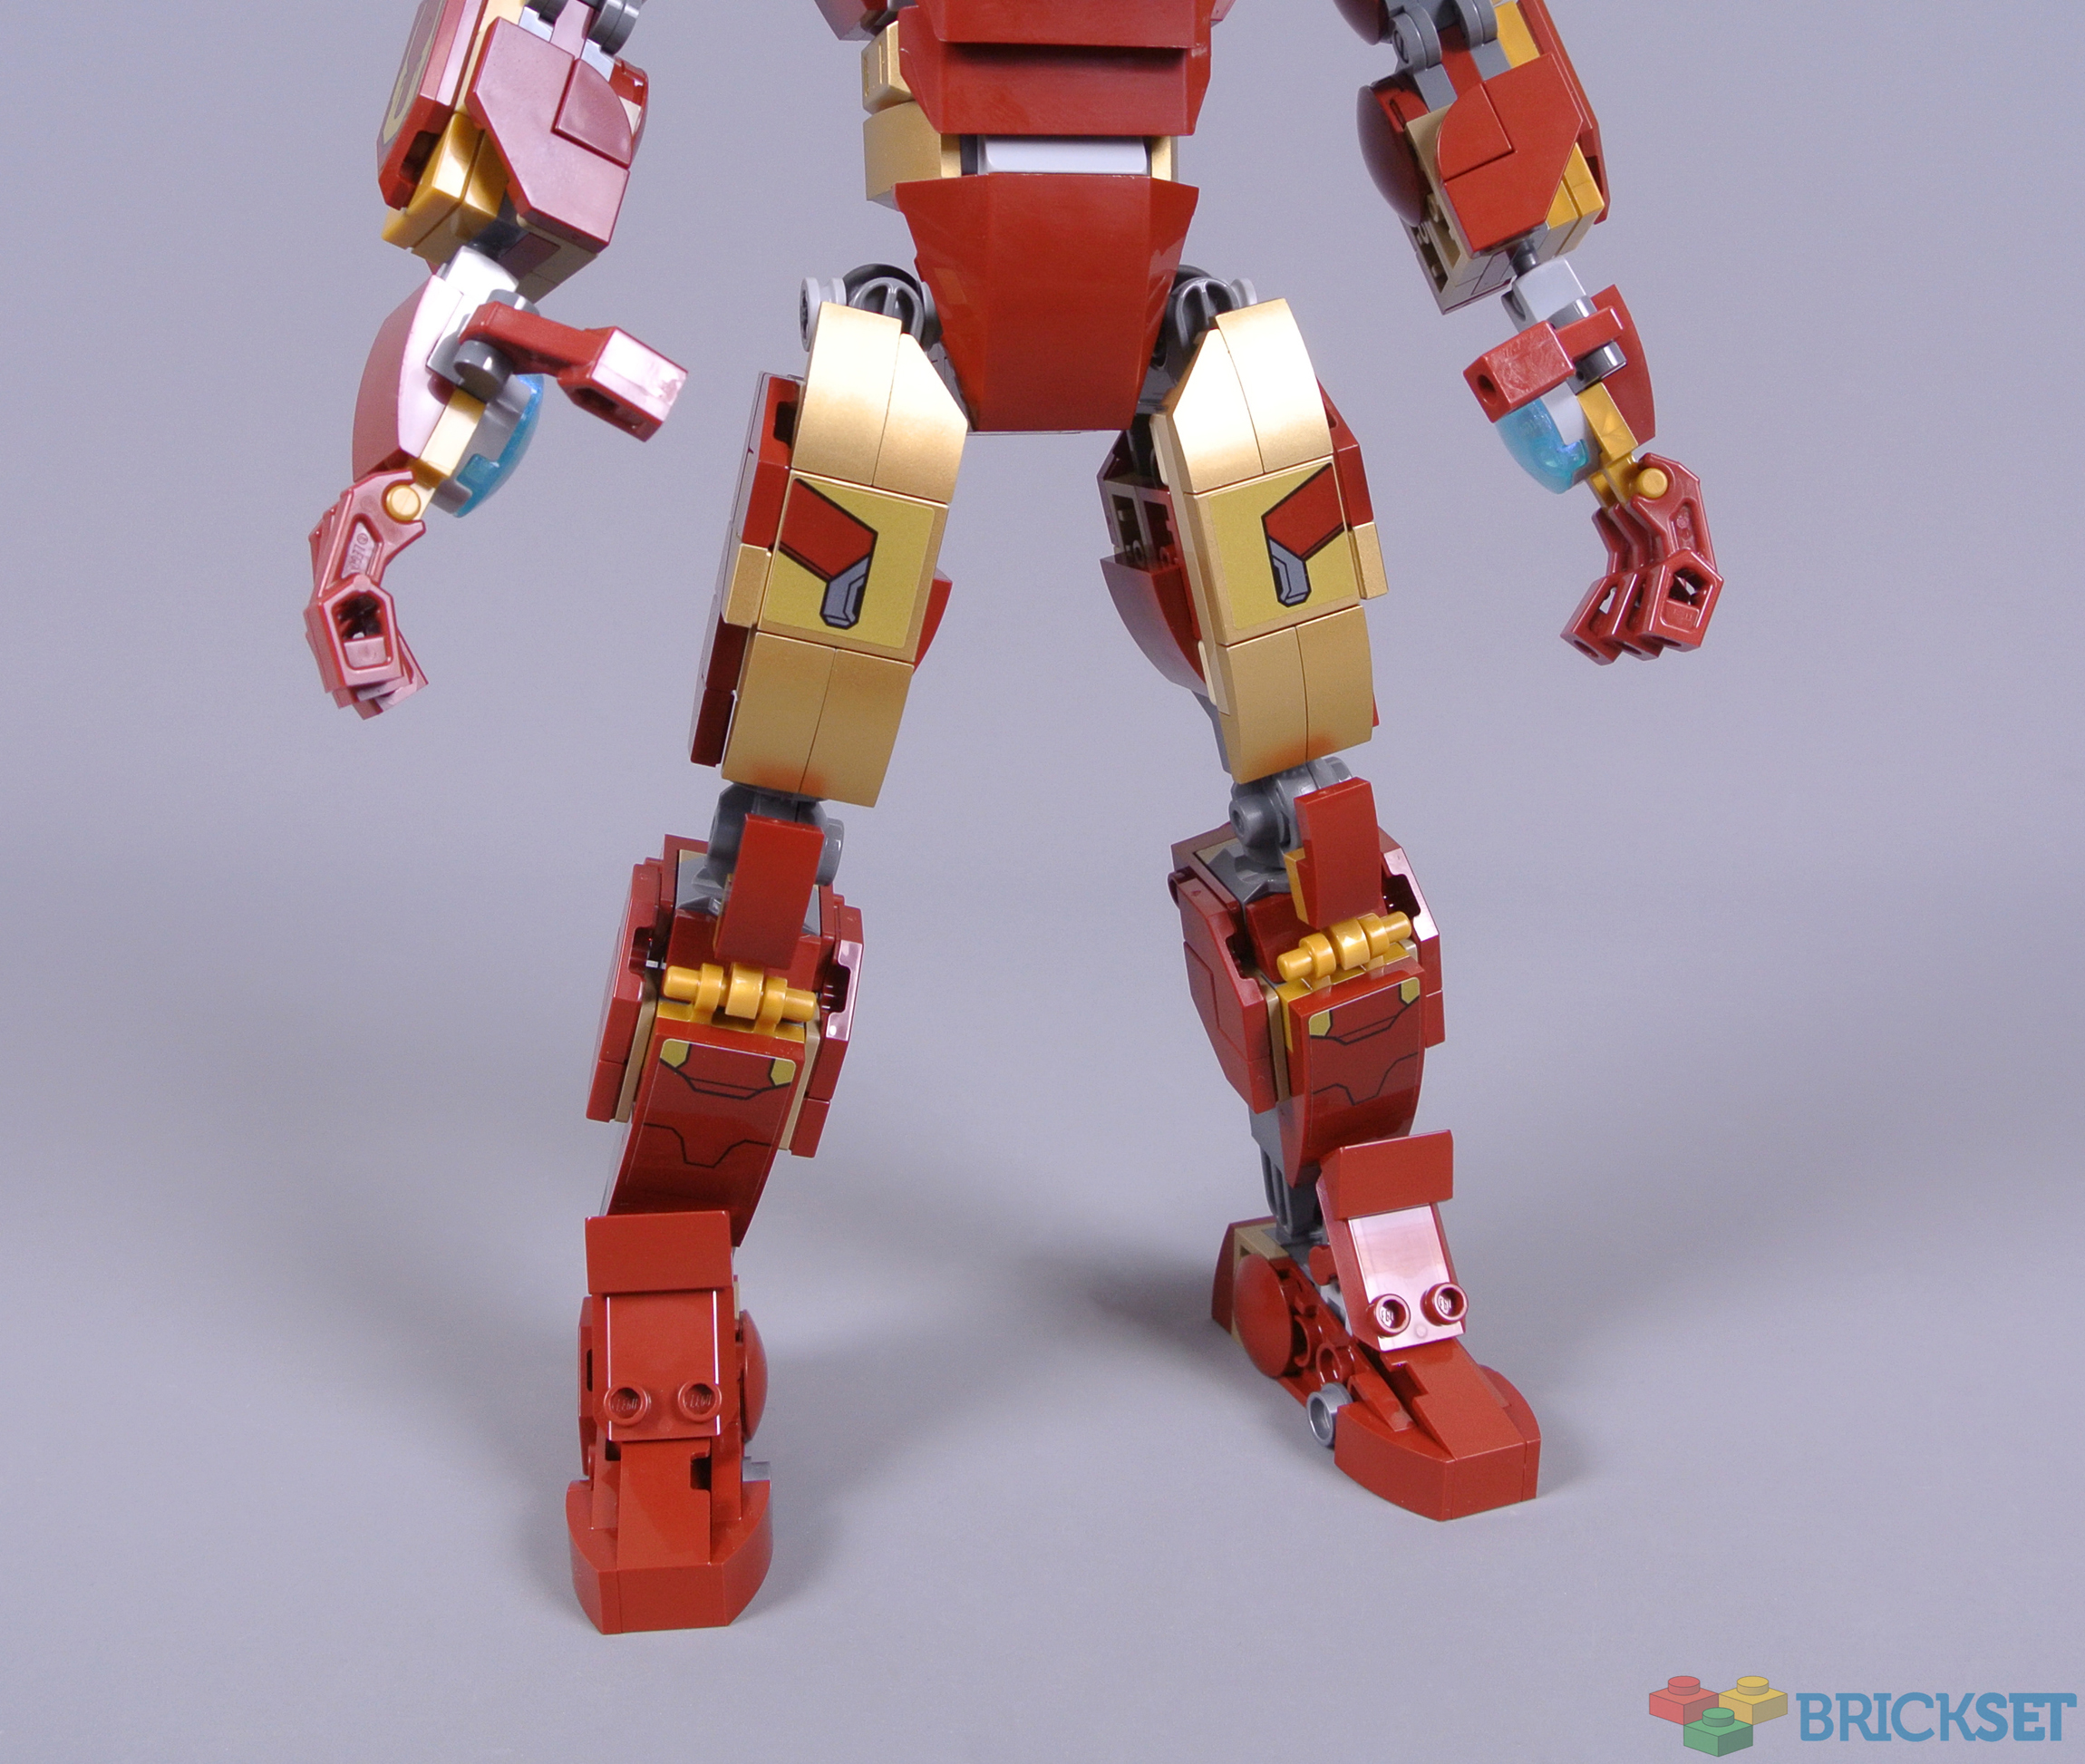 LEGO® Marvel review & MOCs: 76206 Iron Man Figure  New Elementary: LEGO®  parts, sets and techniques